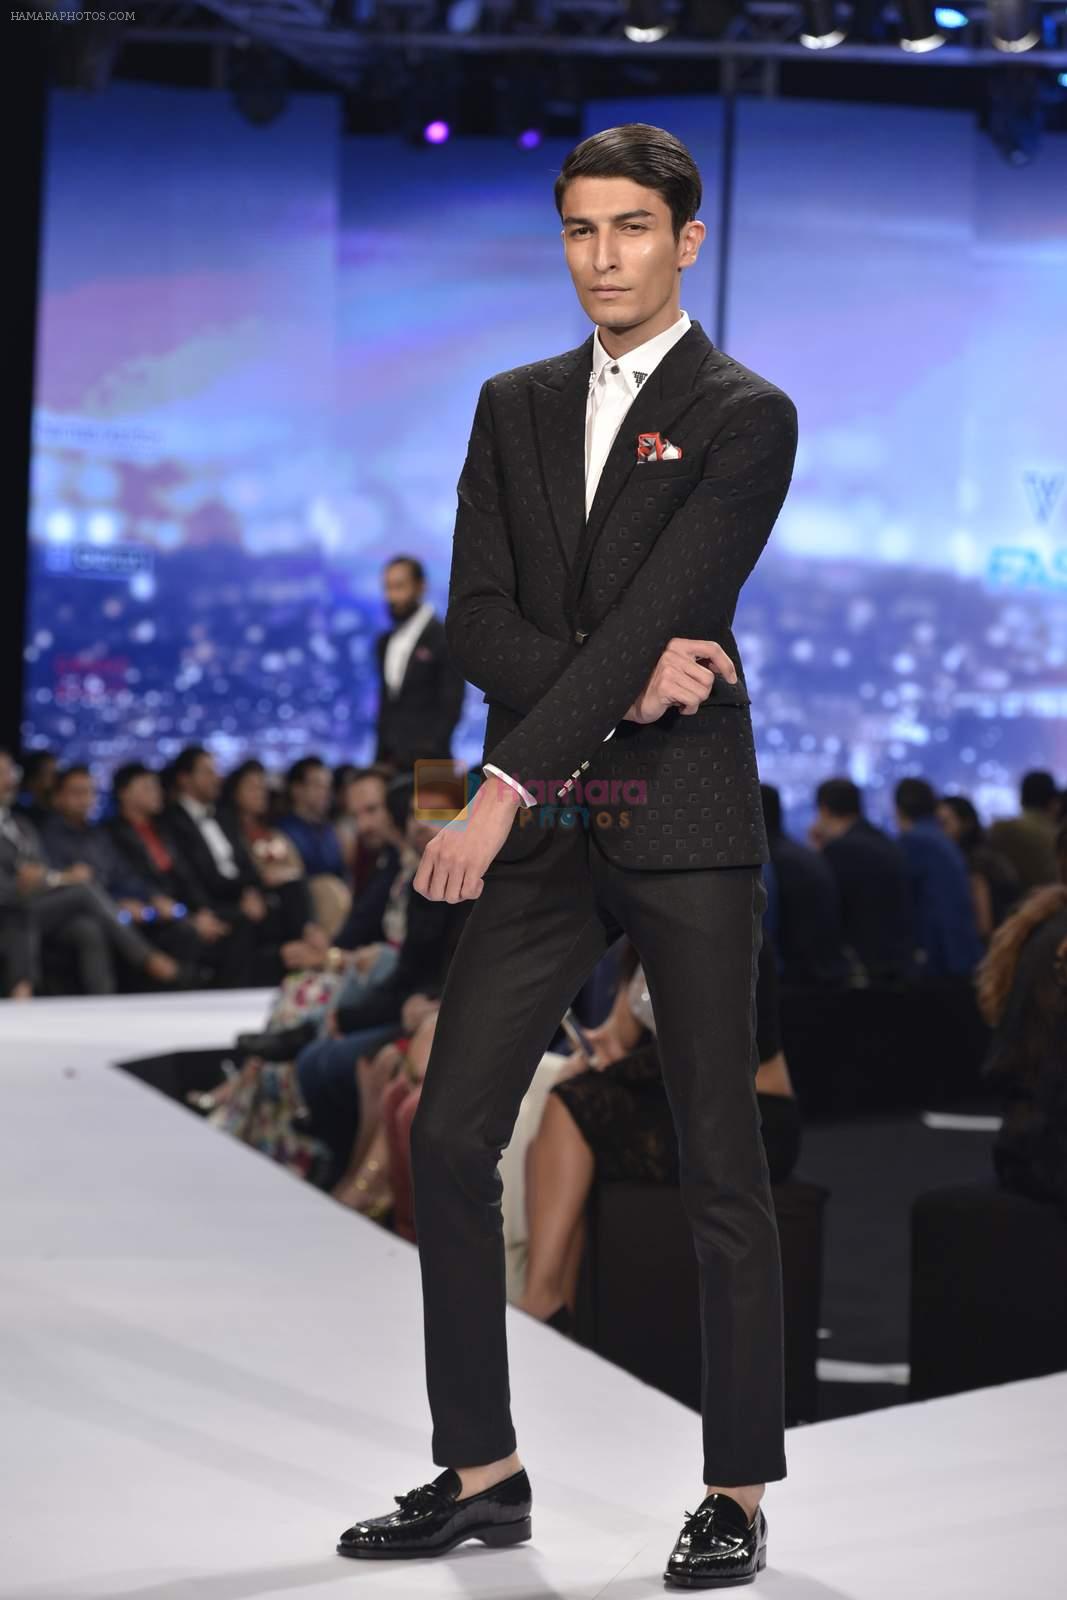 Model walk for troy costa Show on 1st Dec 2015